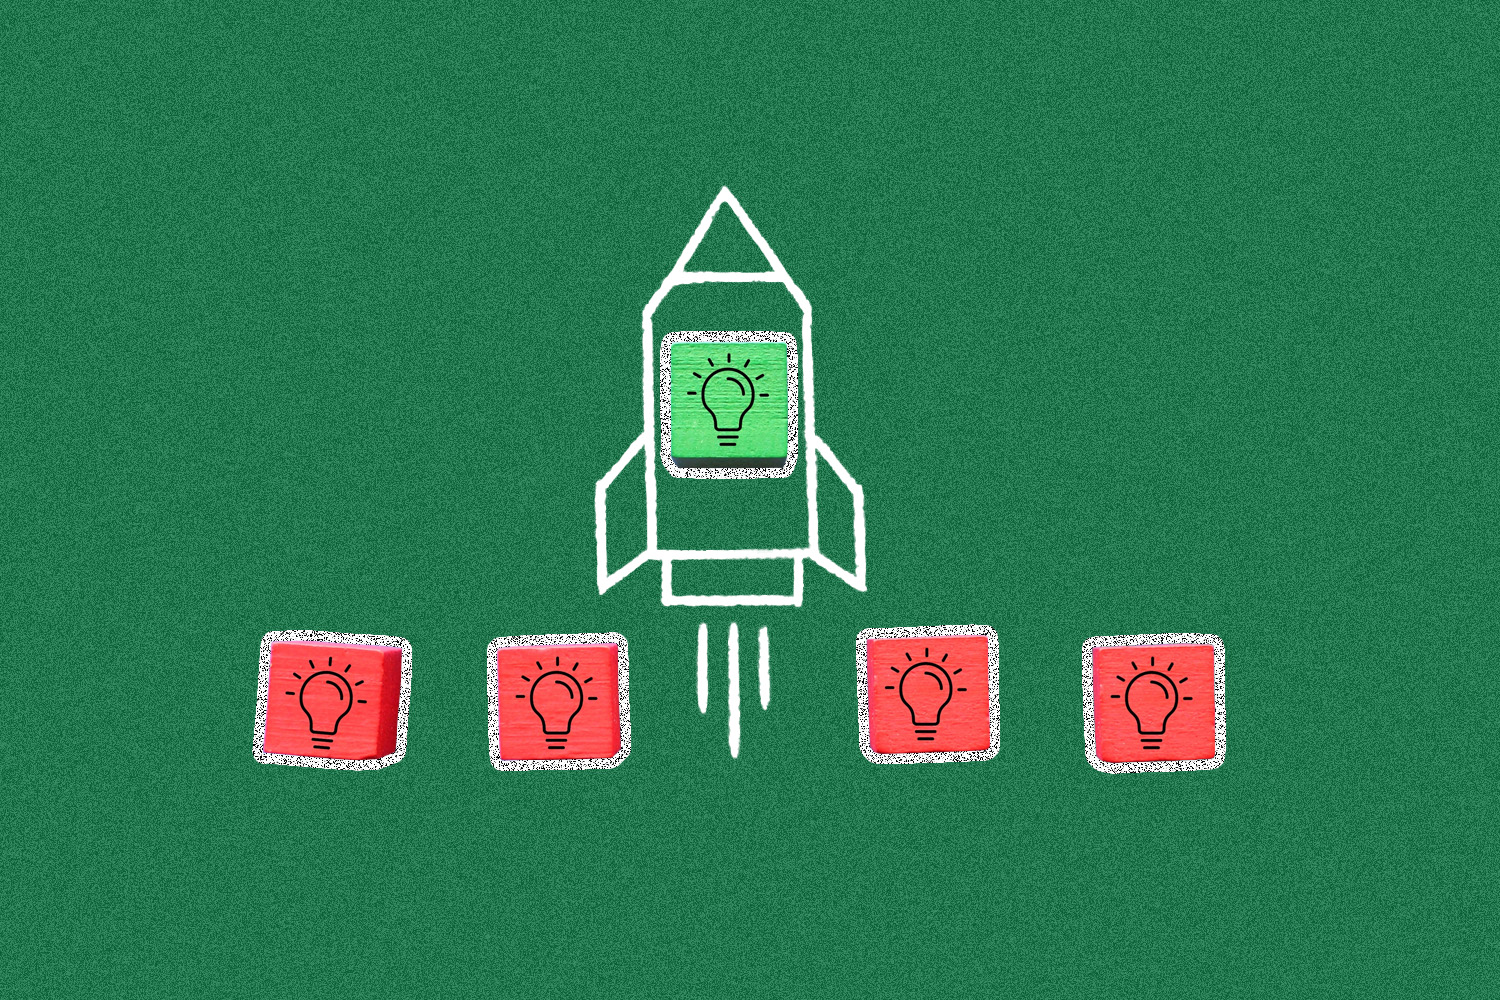 Four red blocks in a row with a lightbulb drawing on each; raised in the middle is one green block with a lightbulb drawing inside the drawing of a rocket